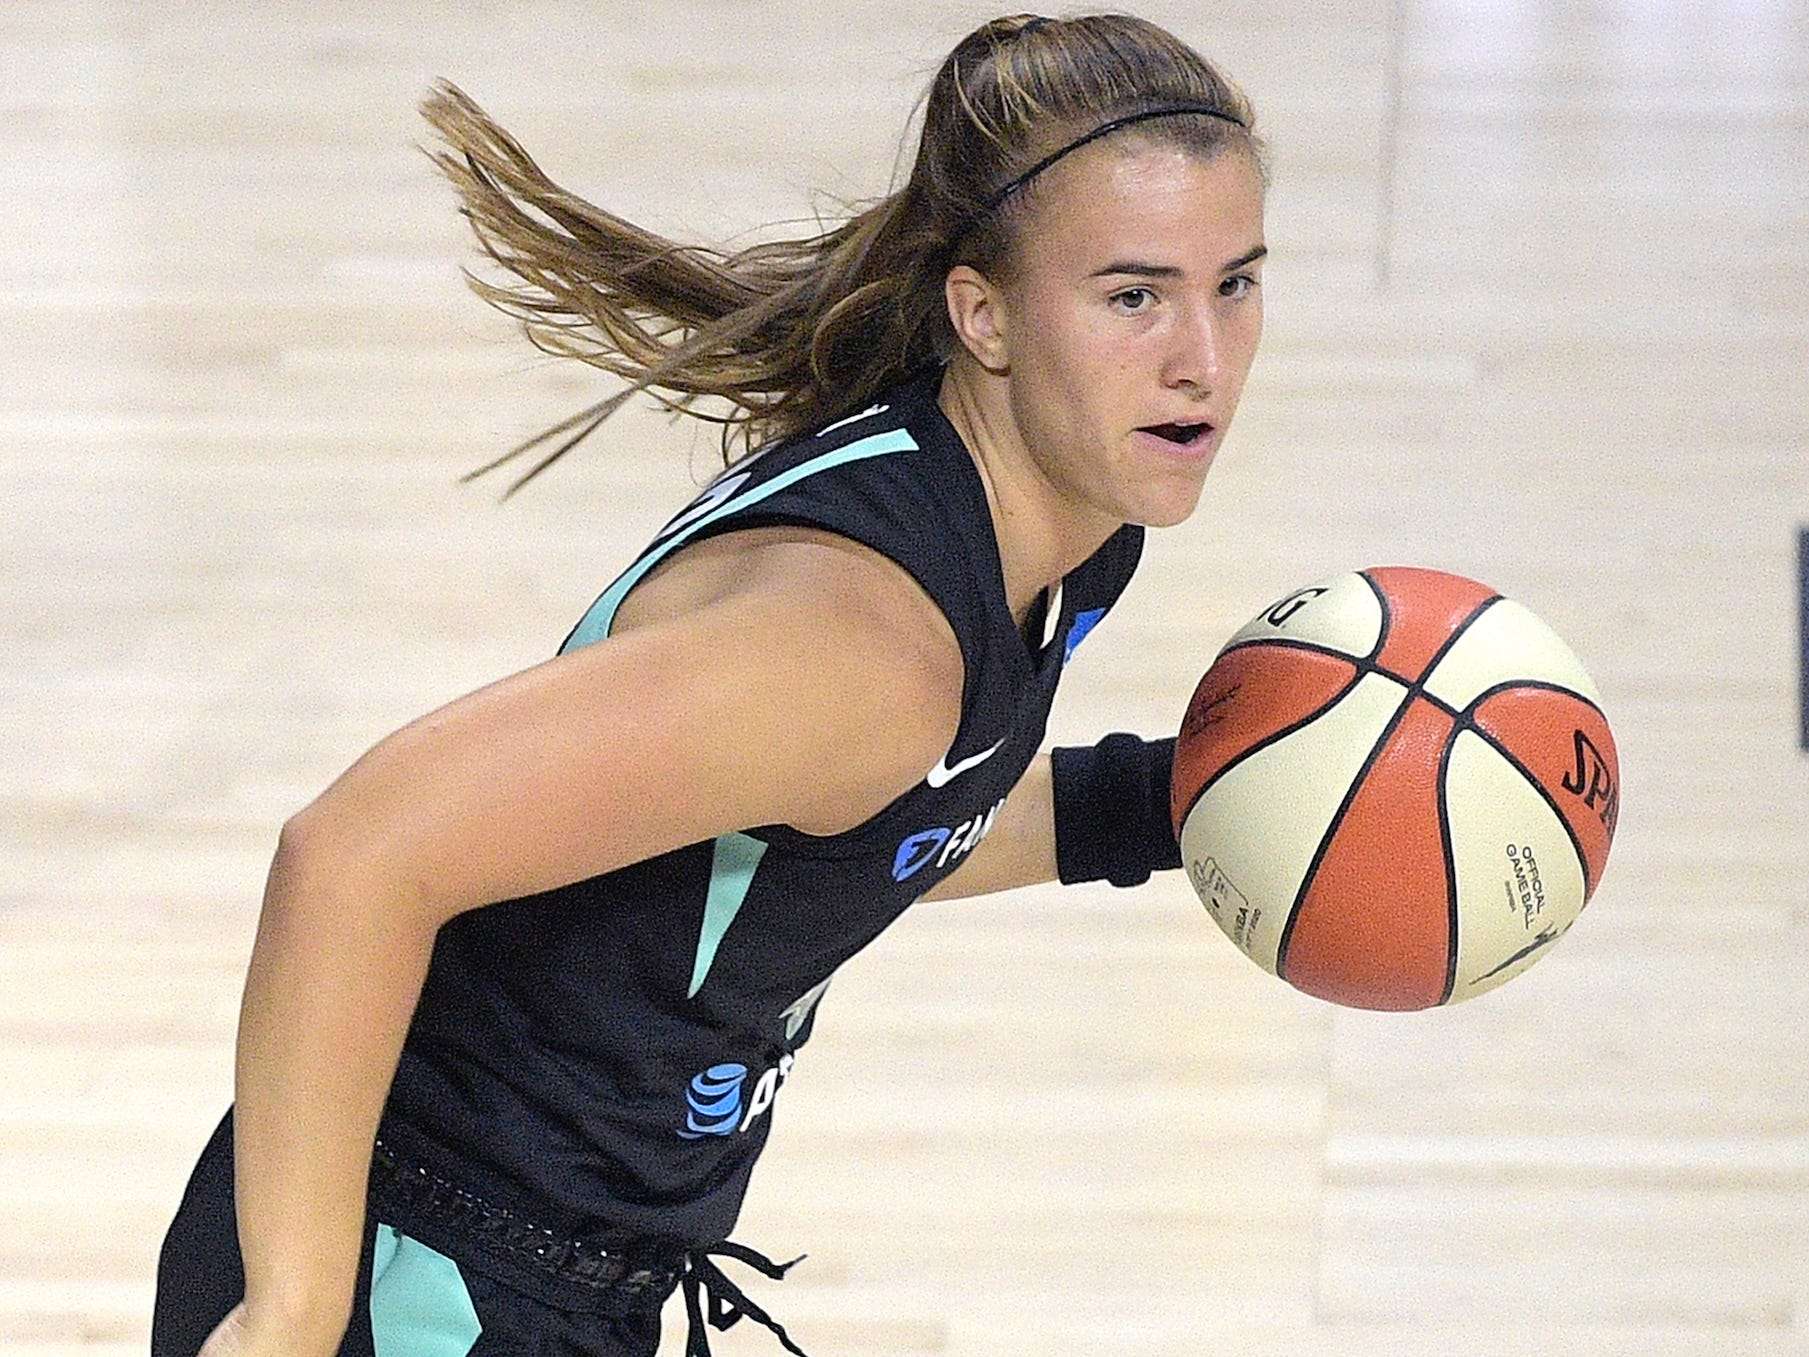 Sabrina Ionescu is back in the gym after her seasonending ankle injury